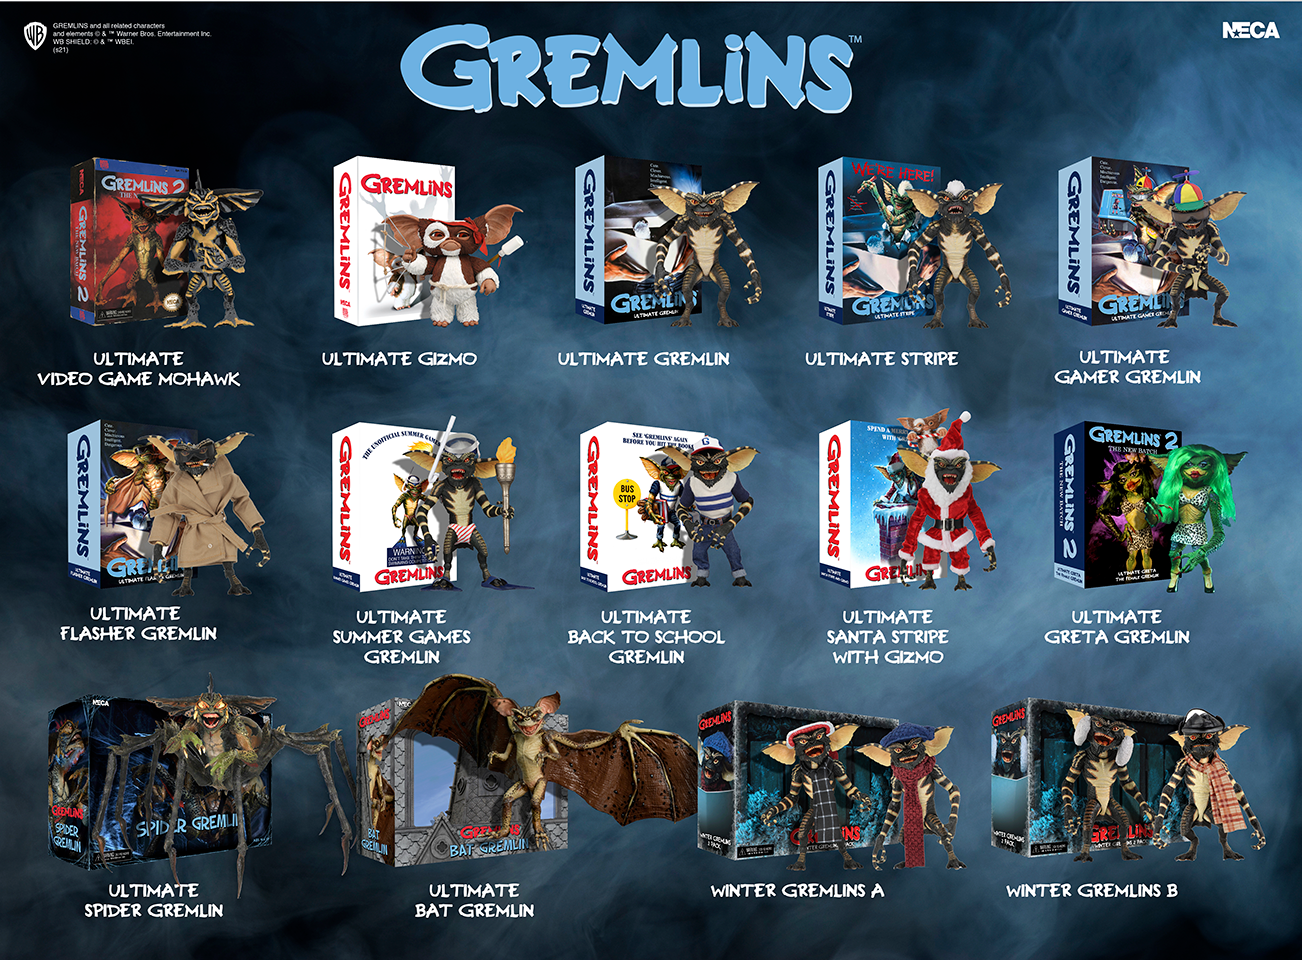 12 Days of Downloads 2020 – Day 8: Gremlins Visual Guide